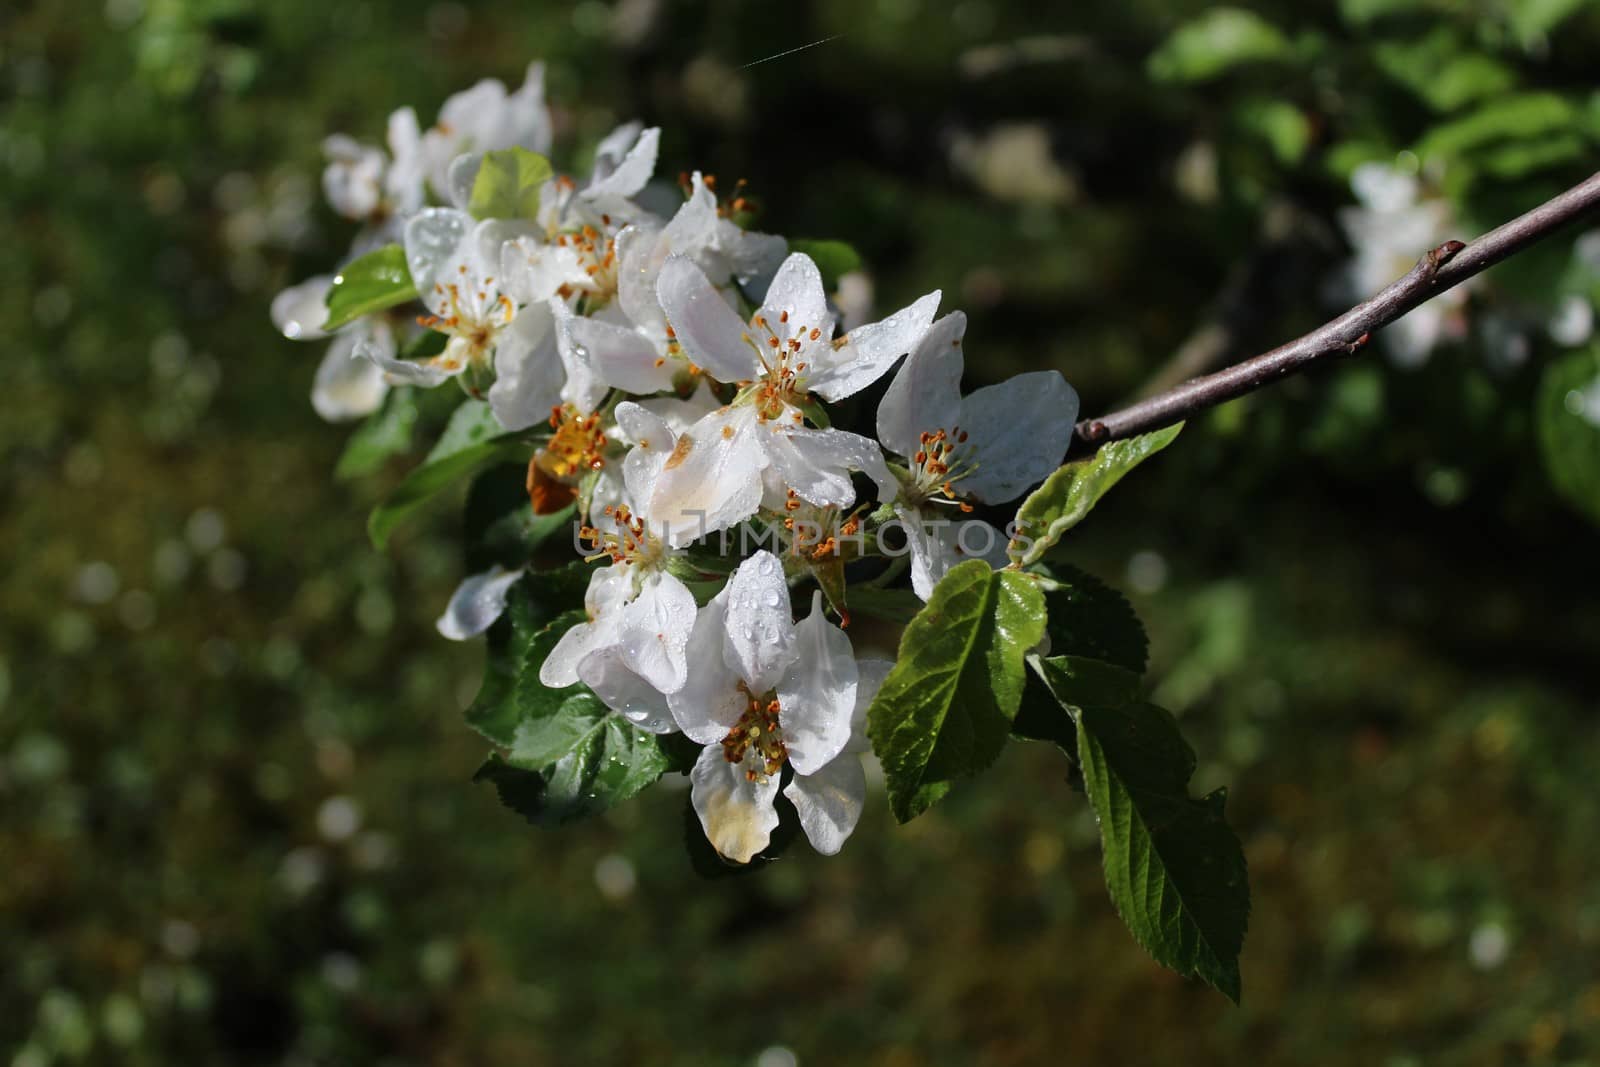 wonderful apple tree blossoms after the rain by martina_unbehauen